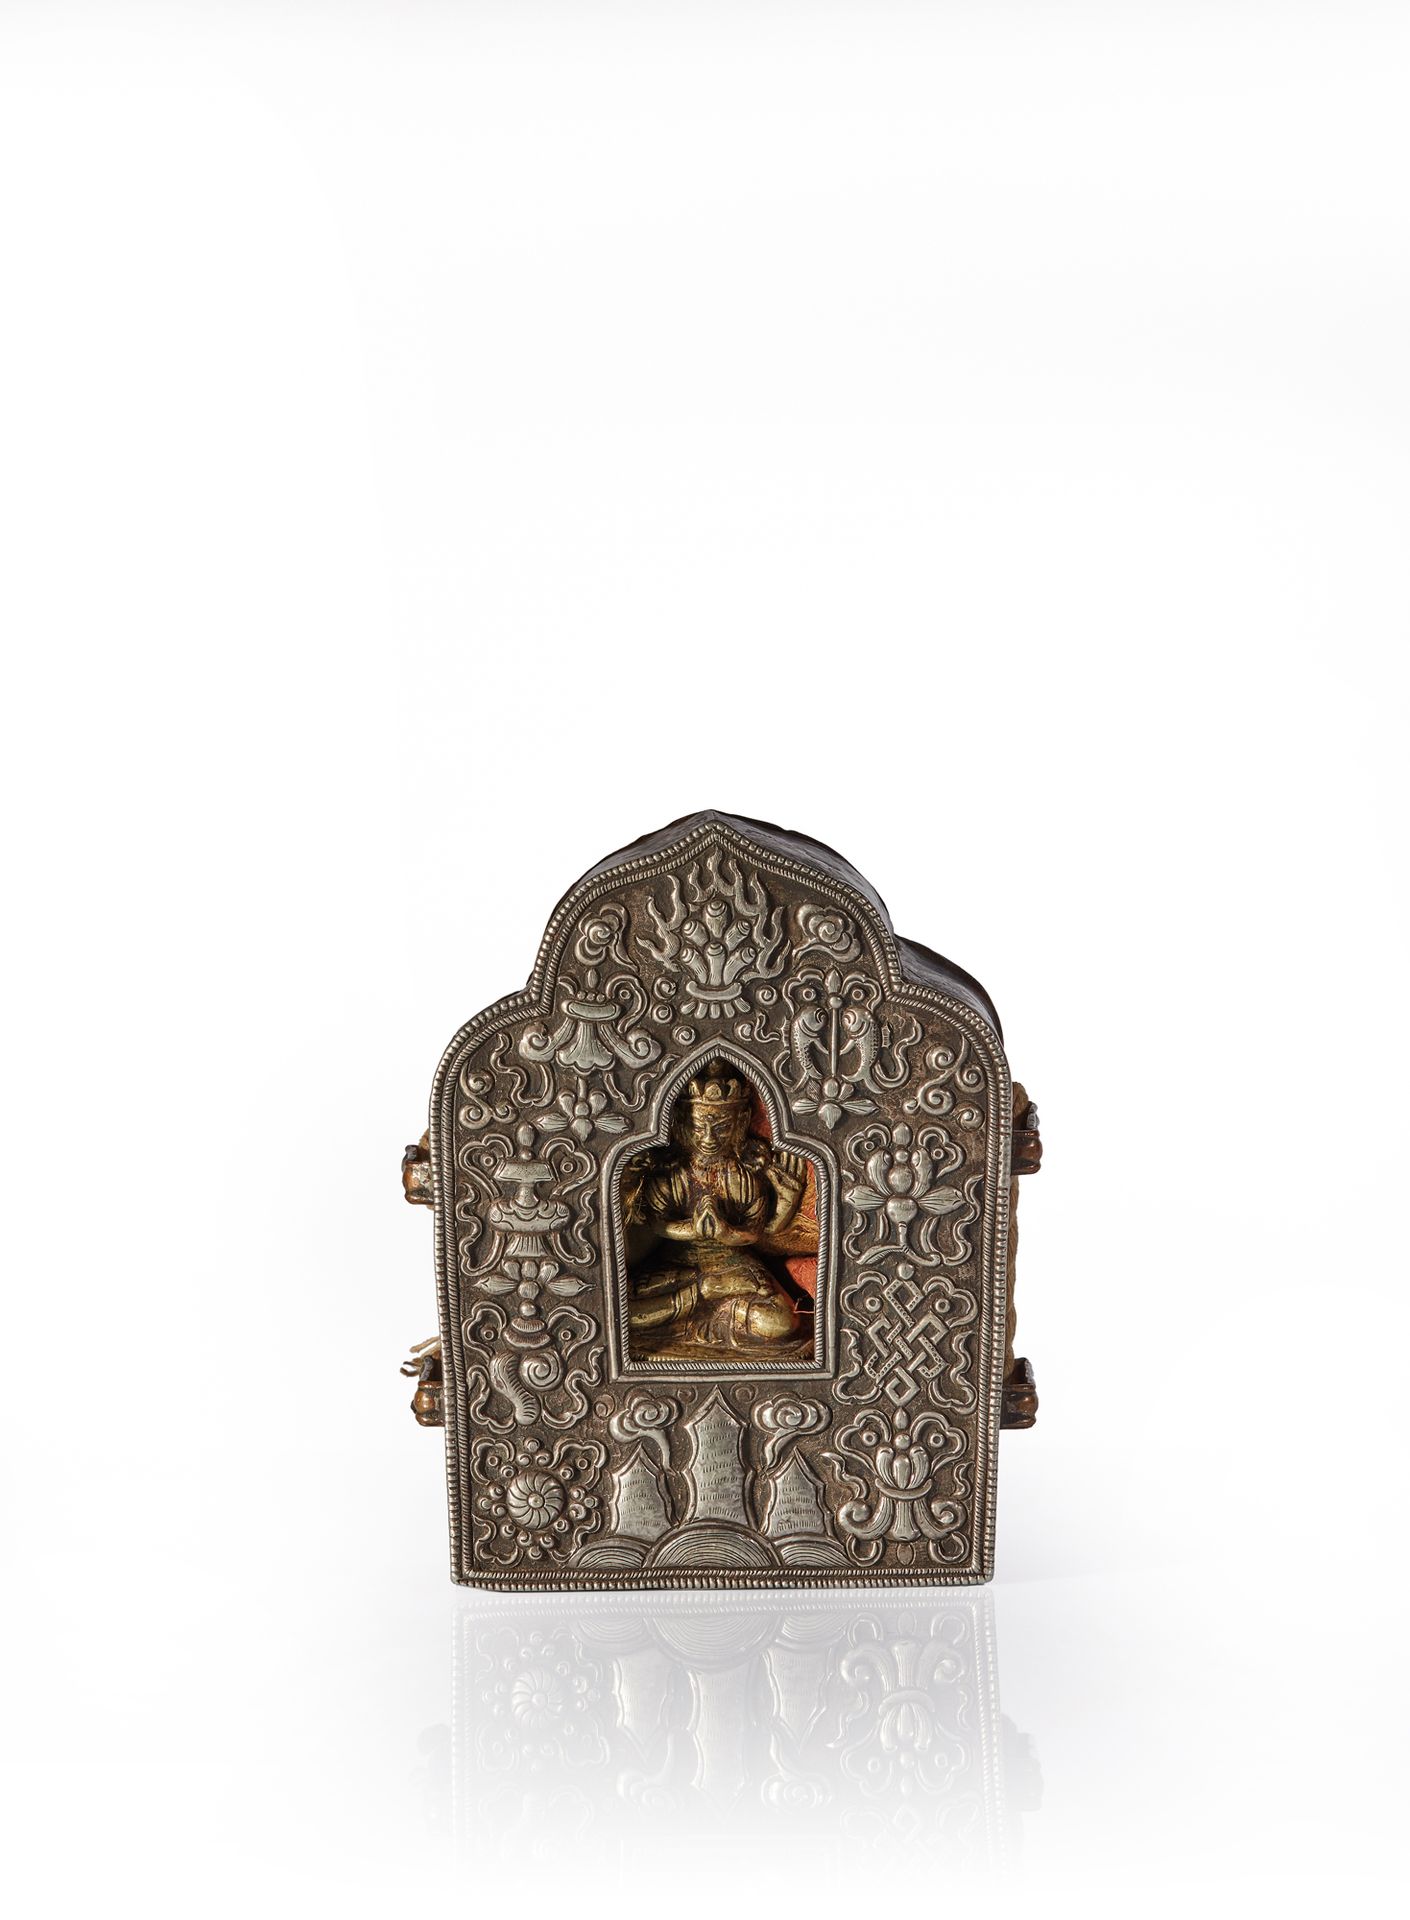 TIBET - XIXe siècle Portable ga'u altar, the silver front chased with the eight &hellip;